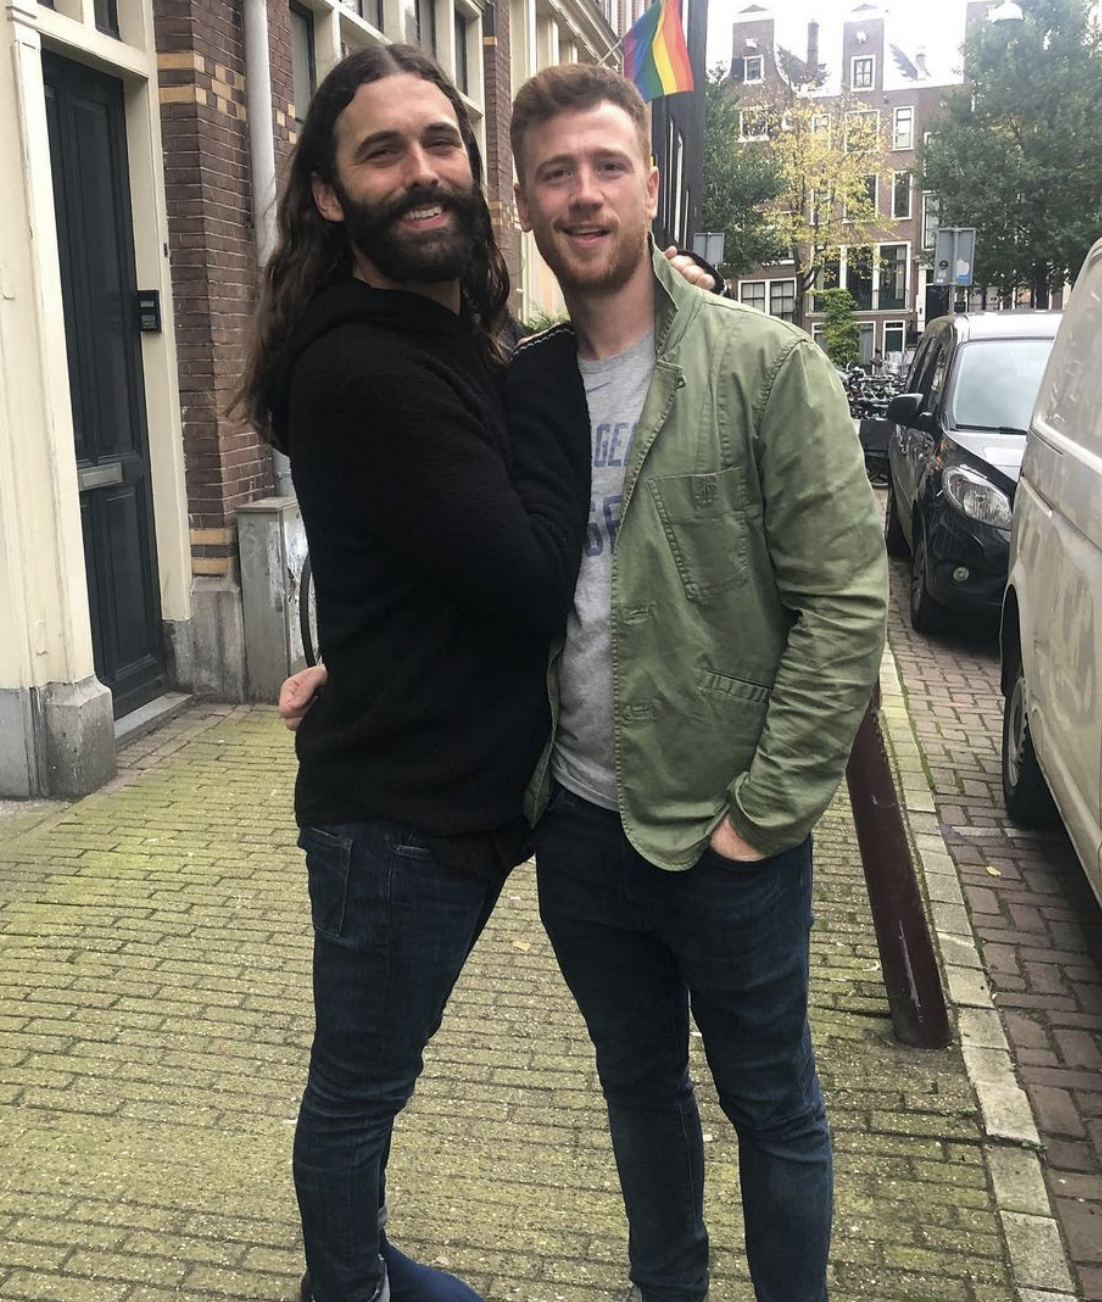 <p>On Dec. 31, 2020, "Queer Eye" star Jonathan Van Ness revealed on Instagram that <a href="https://www.wonderwall.com/celebrity/celeb-weddings-2020-3022551.gallery">he'd quietly married</a> Mark Peacock earlier in the year. A few days later, the hairstylist and grooming expert shared the story of how they fell in love. "We went on a date in London, which turned into more dates whilst I was on comedy tour," JVN wrote alongside an Instagram <a href="https://www.instagram.com/p/CJi96xEgg5n/">slideshow</a> documenting their romance, which appears to have sparked in October 2019 while he was performing in Britain. "At the end of that time I was taking my mom, aunt & friends on a mini break to Amsterdam. I wanted @marklondon to come with but, was it a bit intense to ask Mark to come after a couple weeks' worth of dates to come meet my mom & and friends on a mini break? Maybe so, but something about Mark felt different and I'm quite sure he felt the same 🥰 ." Soon, Mark moved from London to the States, "learn[ed] to drive on the left, got married to my soulmate and one true love @jvn and adopted a little Jack Russell called Pablo and entered a family with 4 amazing cats," he wrote on his own Instagram <a href="https://www.instagram.com/p/CJexMjDl-Ks/">slideshow</a> of memories. </p>